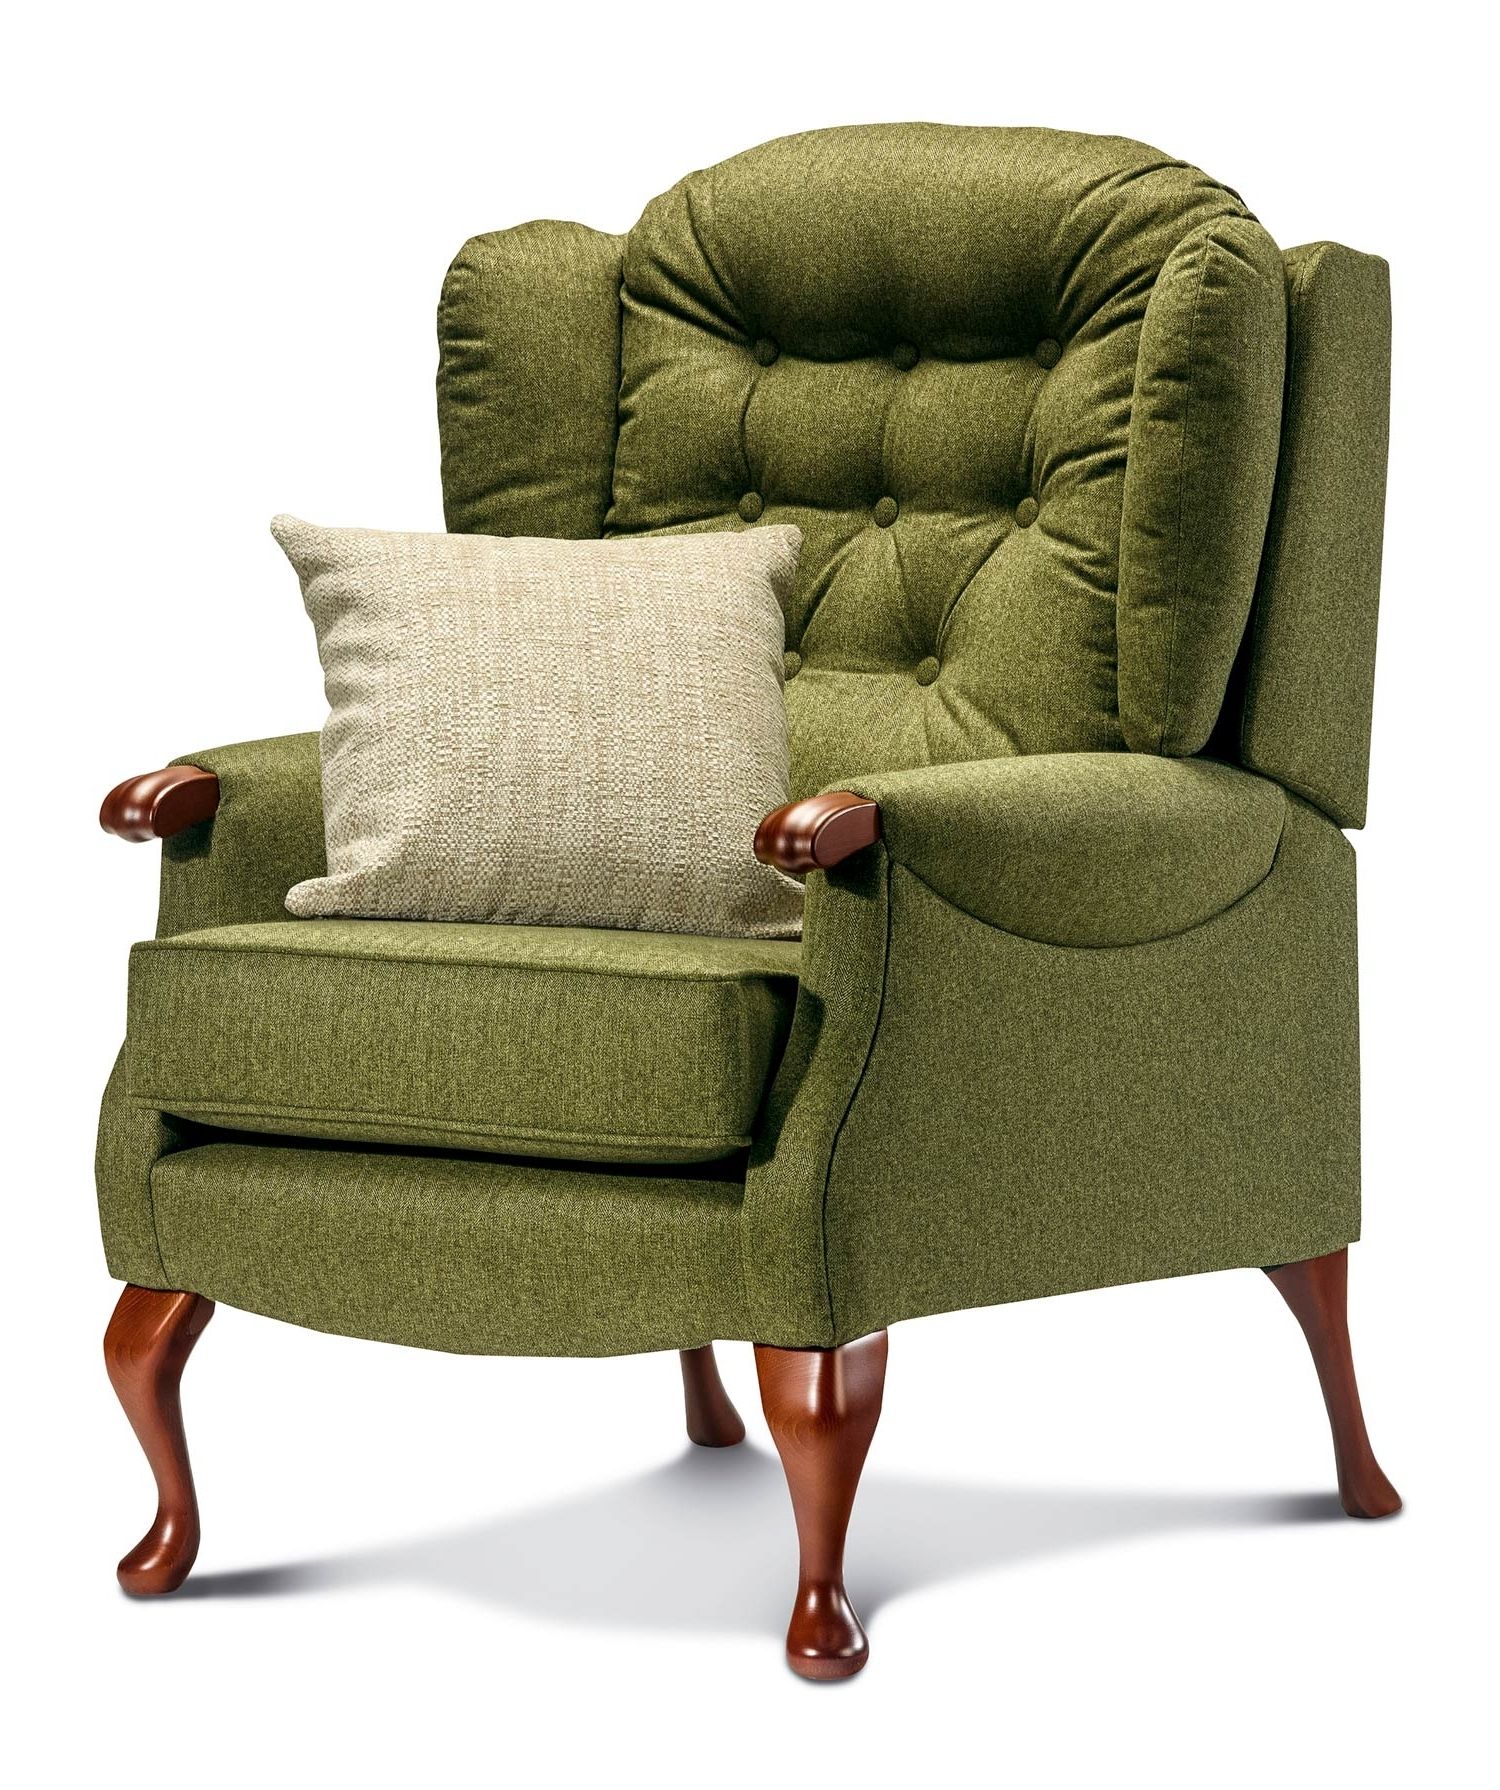 Most Recent Helms Arm Chairs Intended For Chelmsford High Seat Fireside Chair – Phoenix Furniture (View 19 of 20)